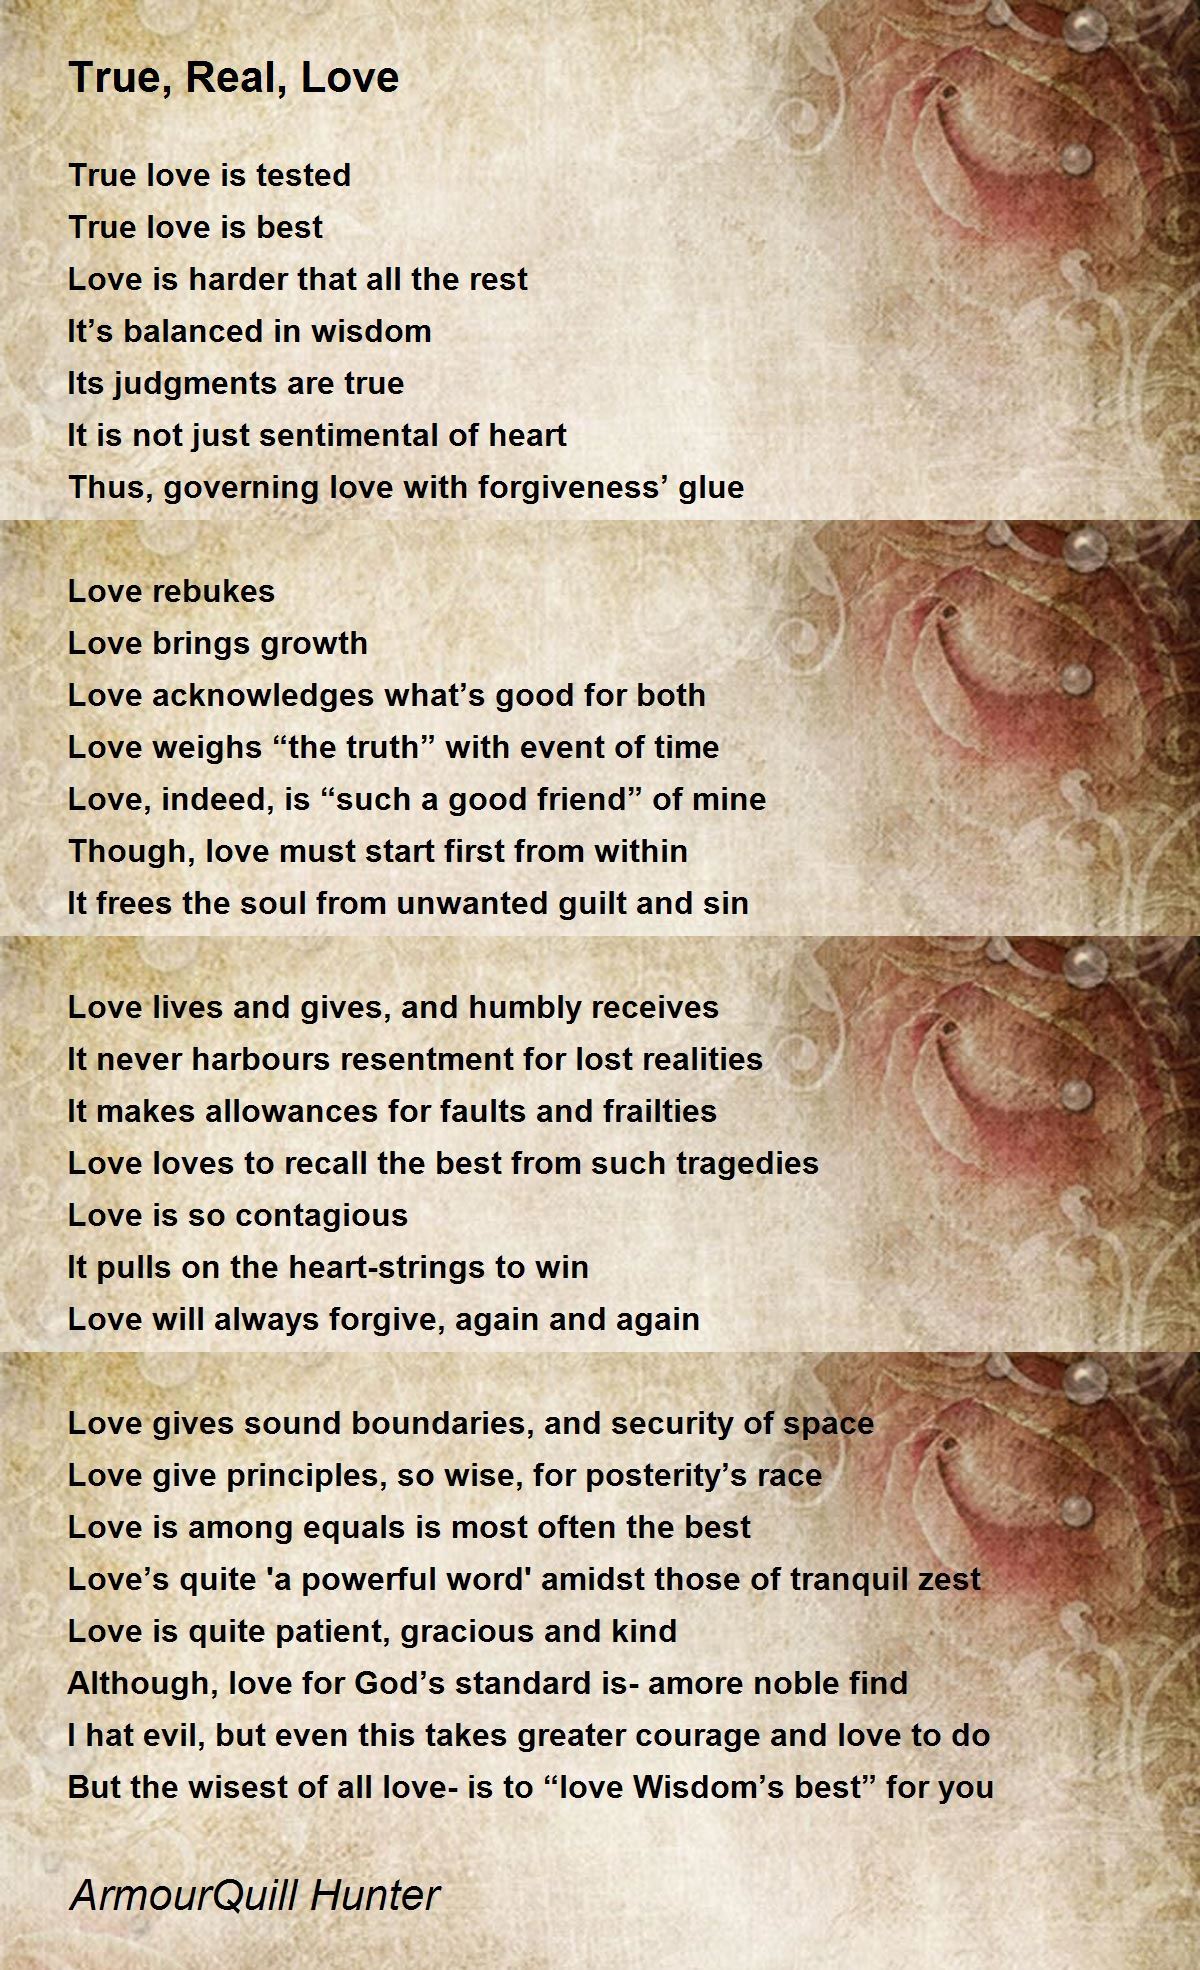 True, Real, Love - True, Real, Love Poem by ArmourQuill Hunter